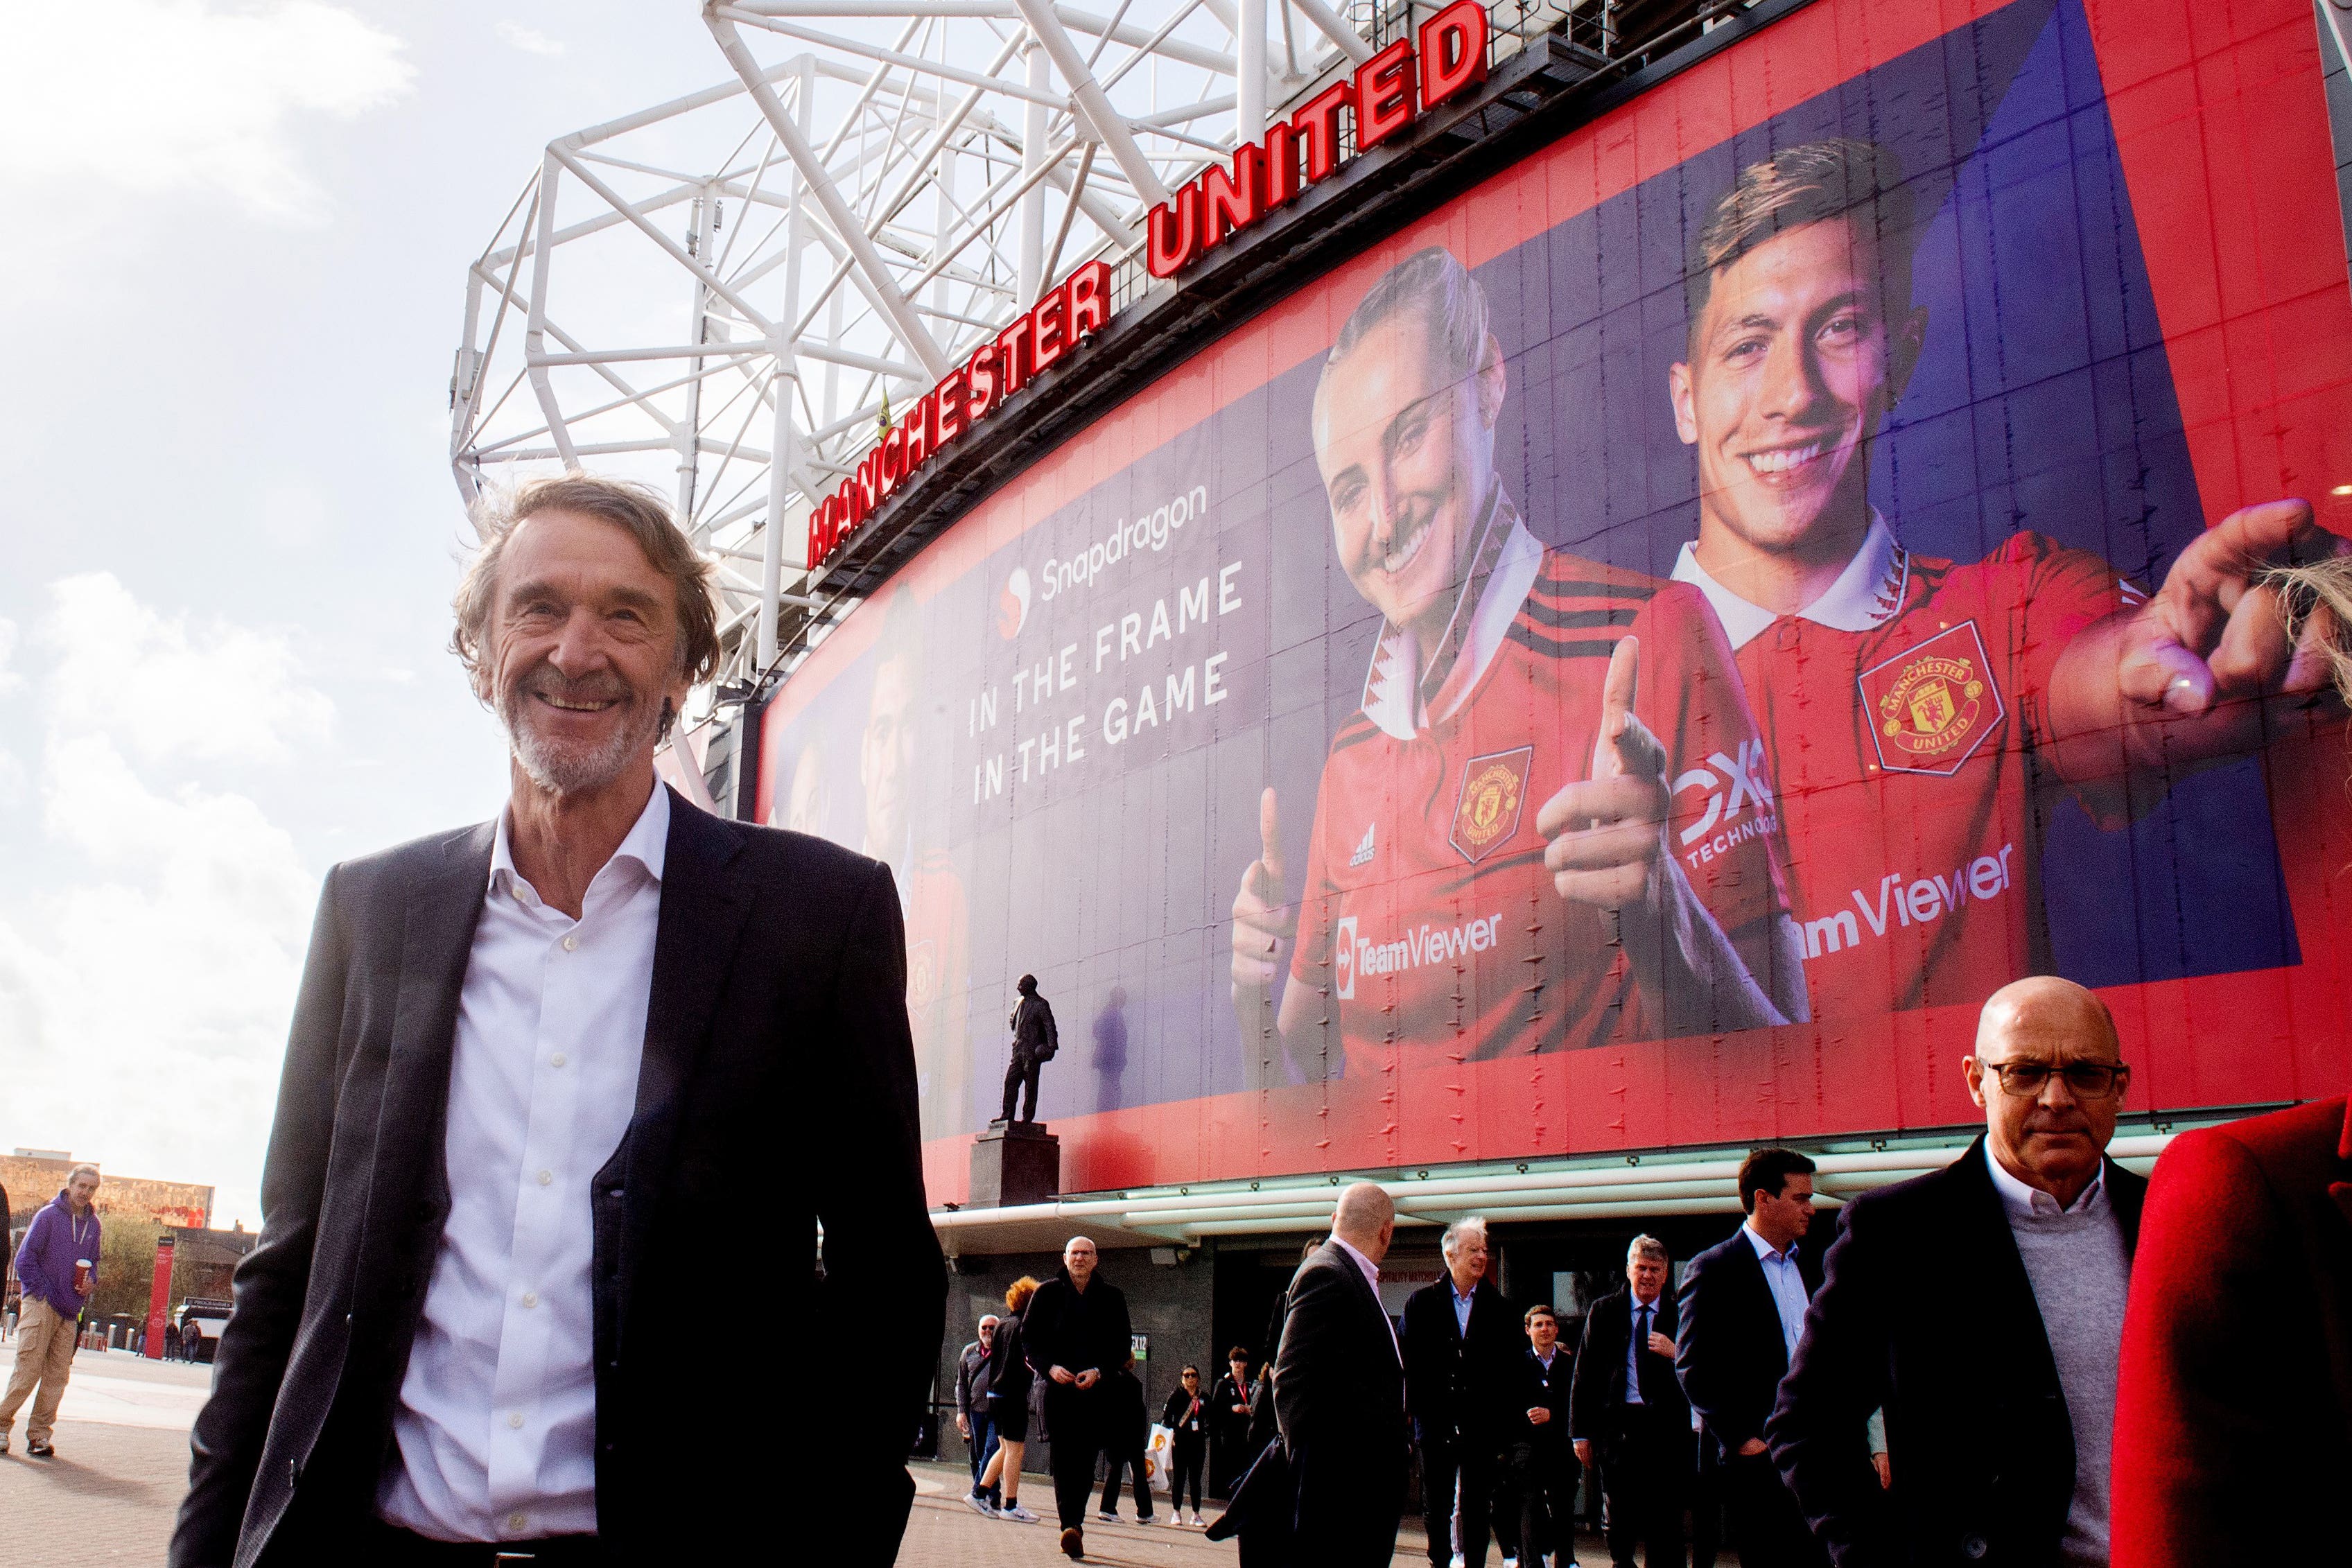 Sir Jim Ratcliffe has expressed his interest in buying Manchester United, with Friday the deadline for third bids to be submitted